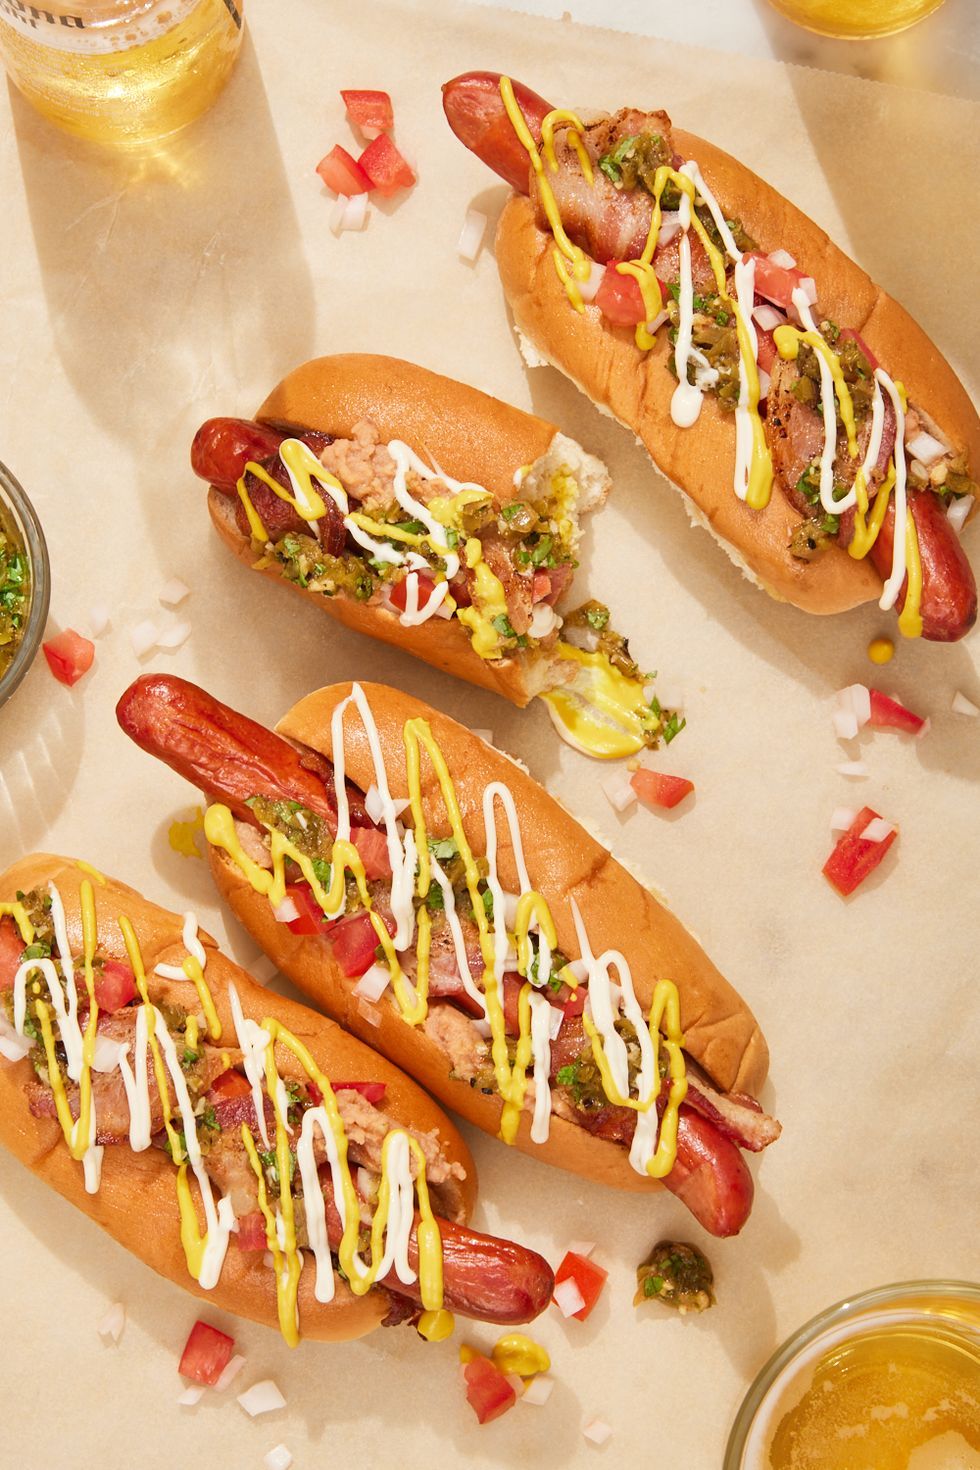 Gourmet Hot Dogs  Gourmet hot dogs, Dog recipes, Hot dogs